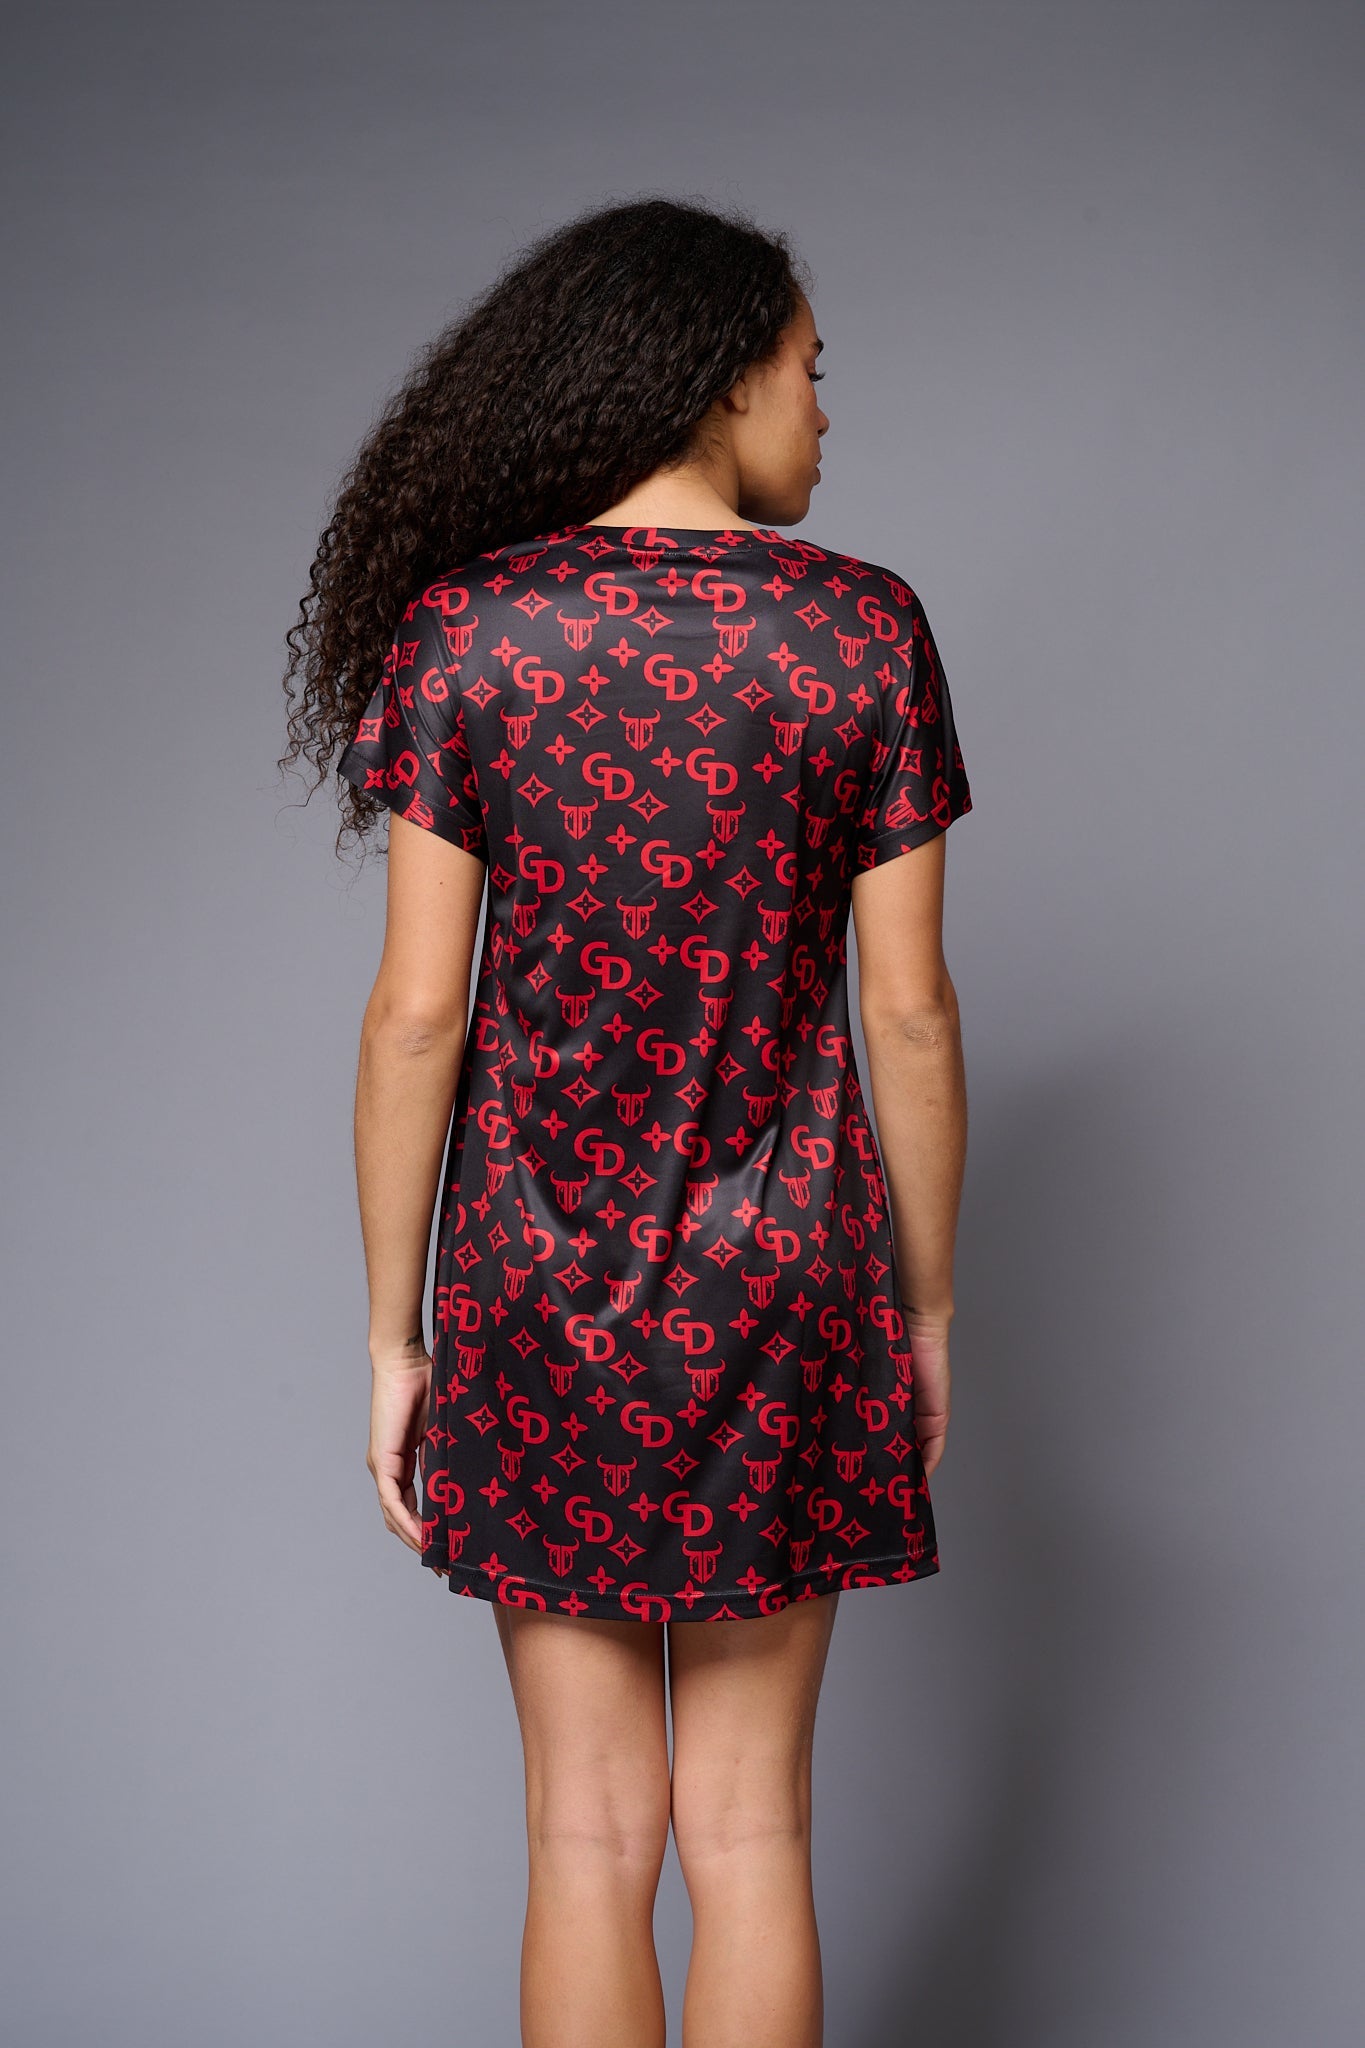 GD (in Red) with logo Printed Black Dresses for Women - Go Devil